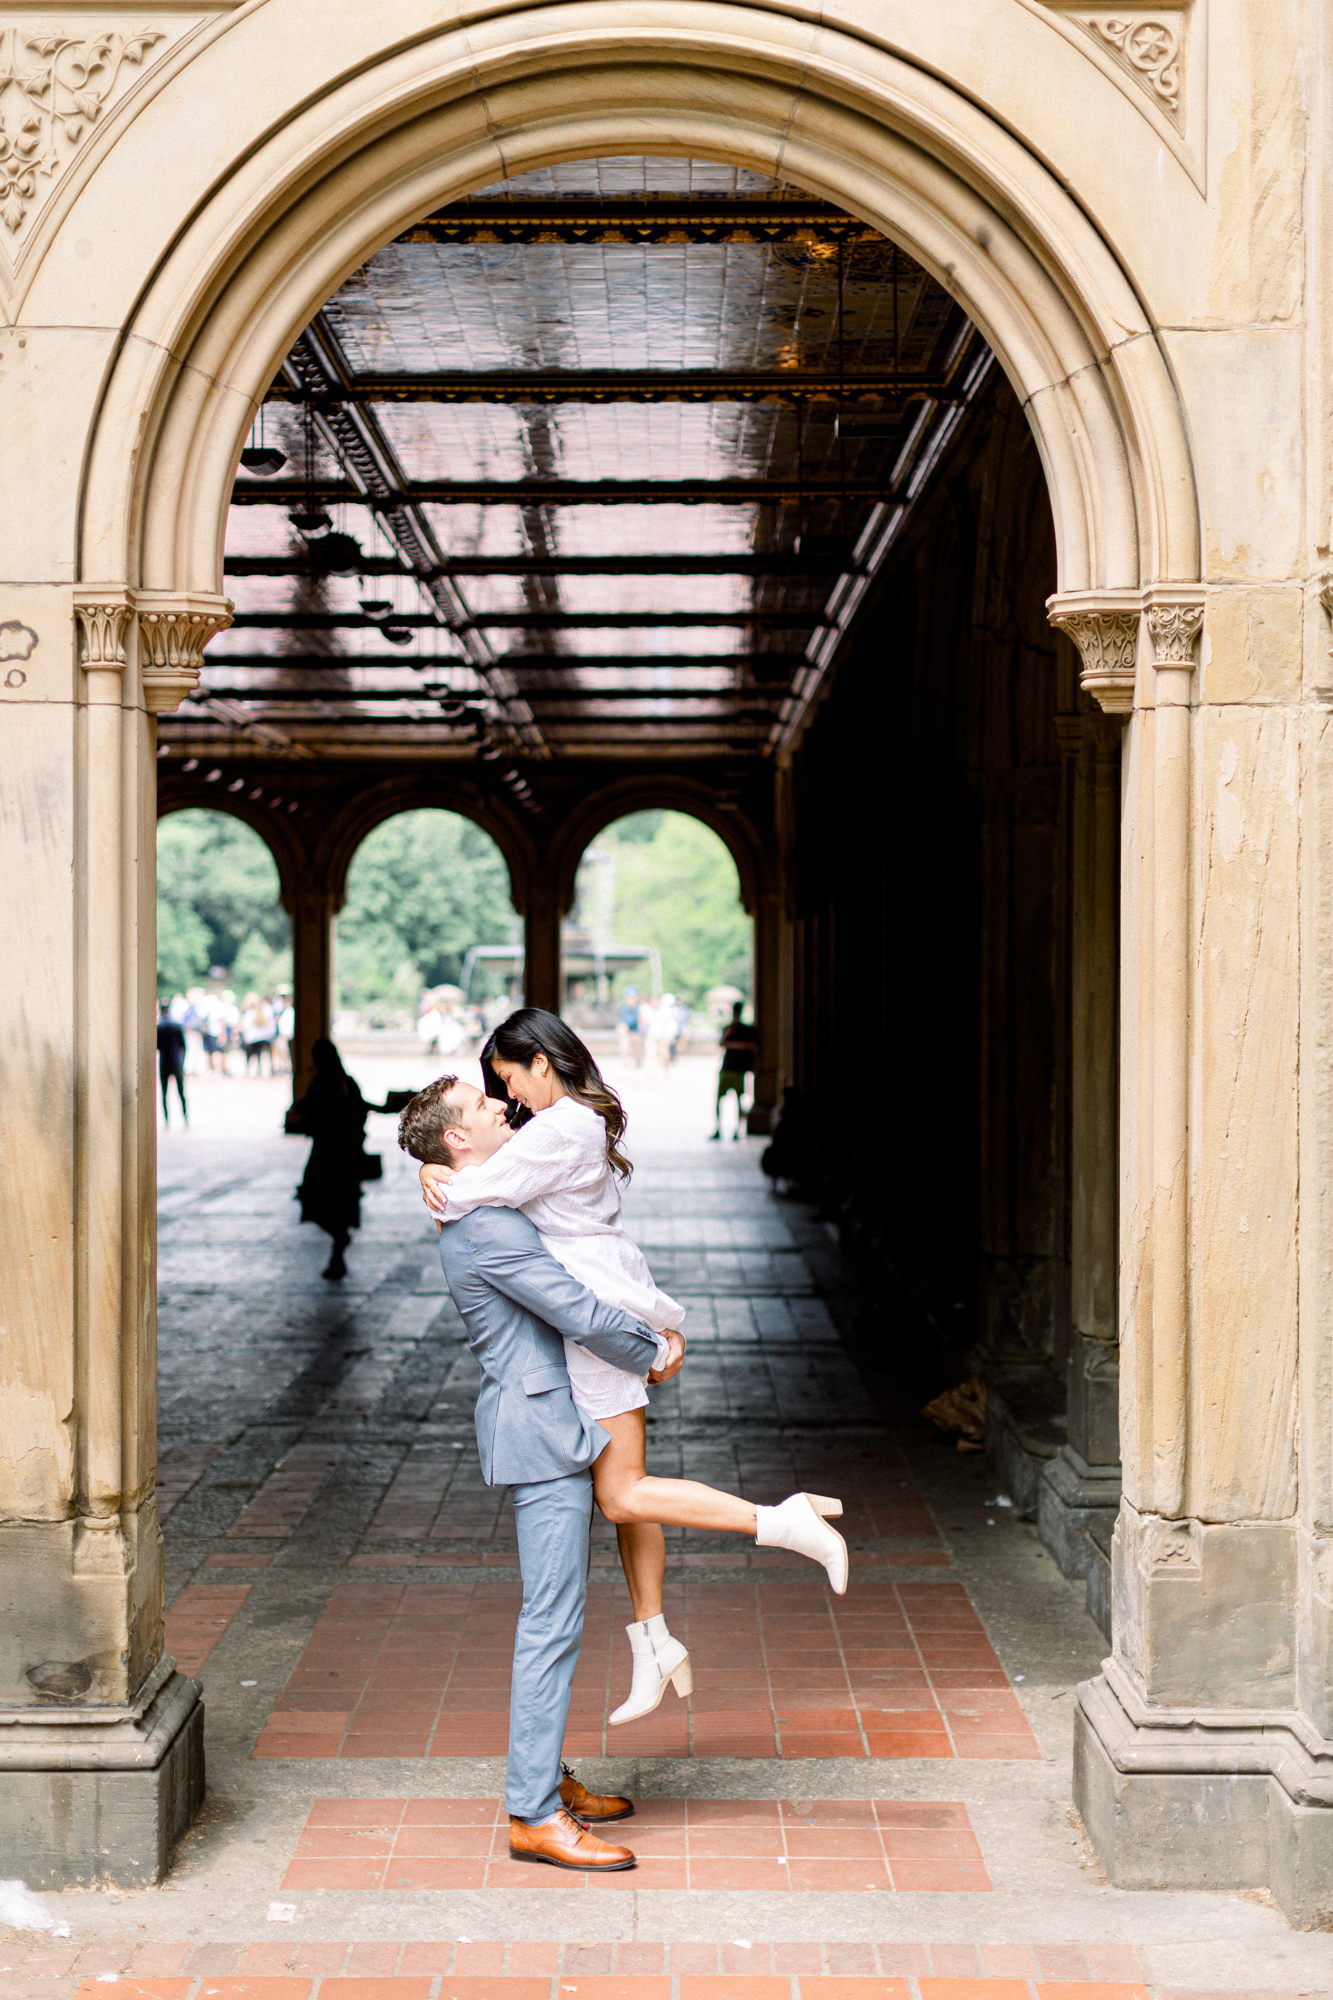 Lovely Central Park Rowboat Engagement Photography in New York